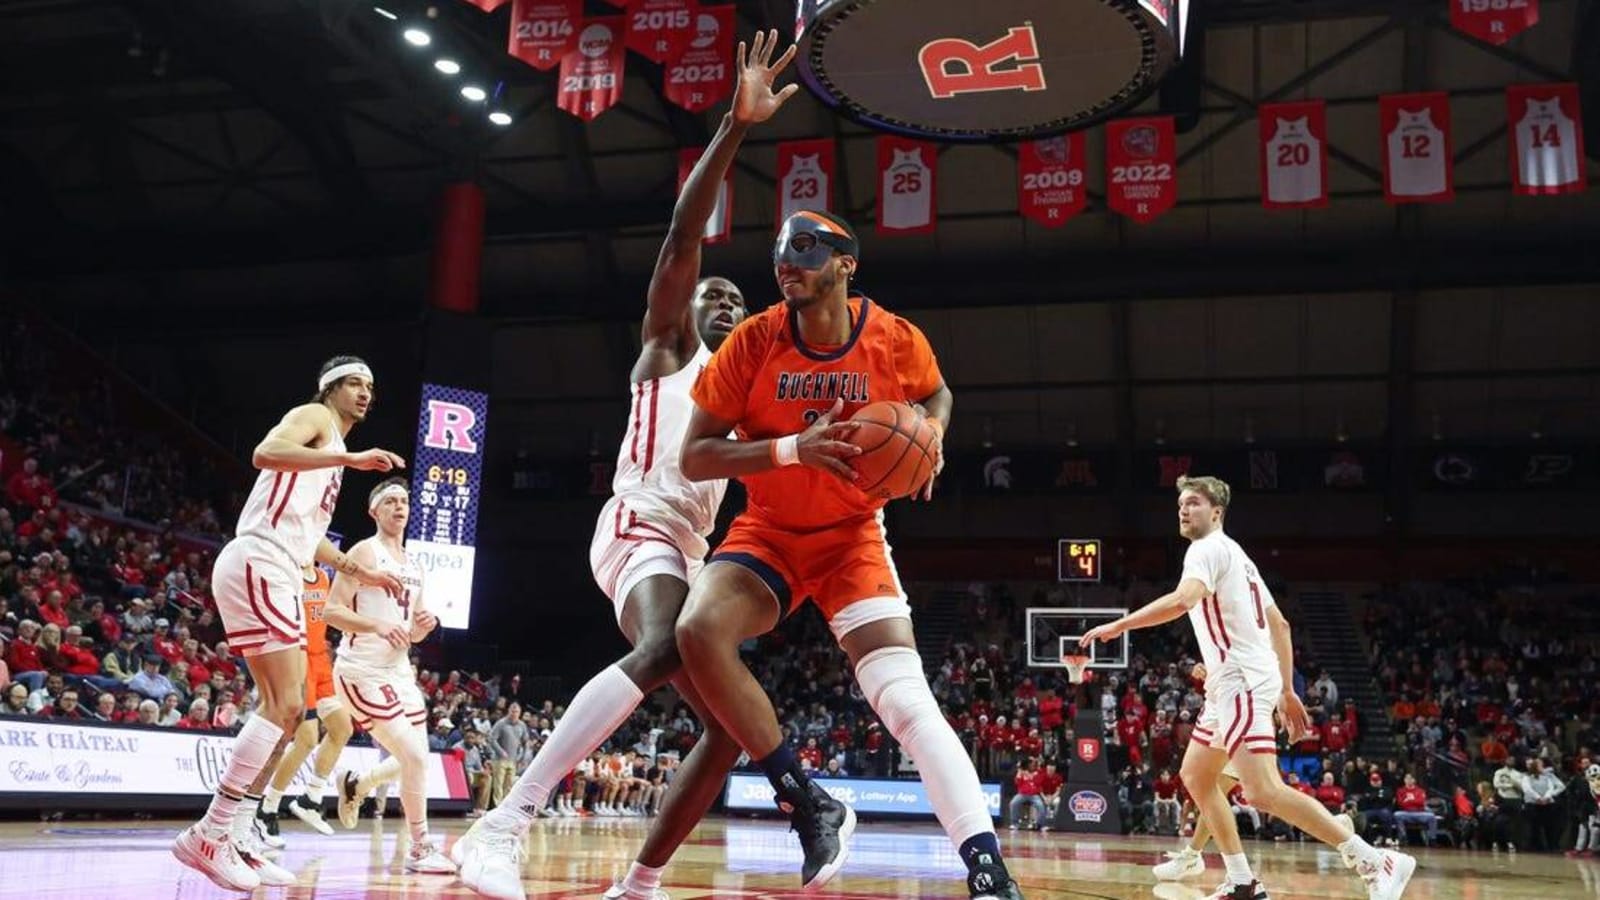 Clifford Omoruyi dominates as Rutgers routs Bucknell